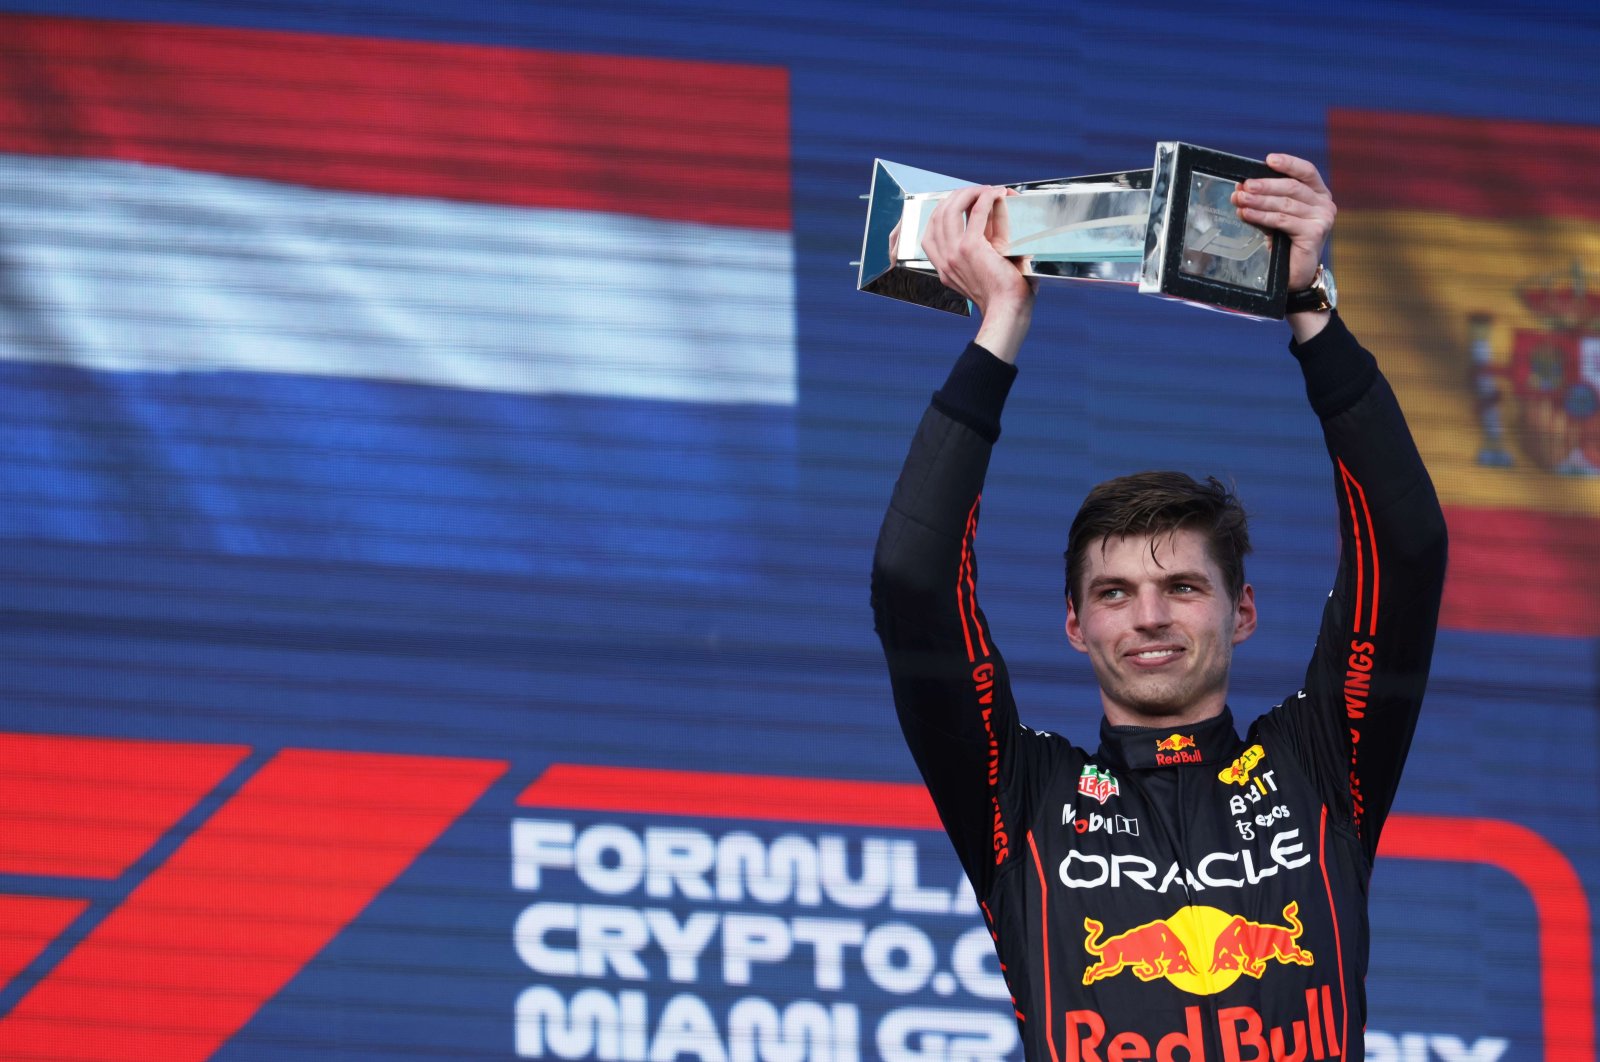 Max Verstappen celebrates on the podium after winning the F1 Miami Grand Prix, Miami, Florida, May 8, 2022. (AFP Photo)